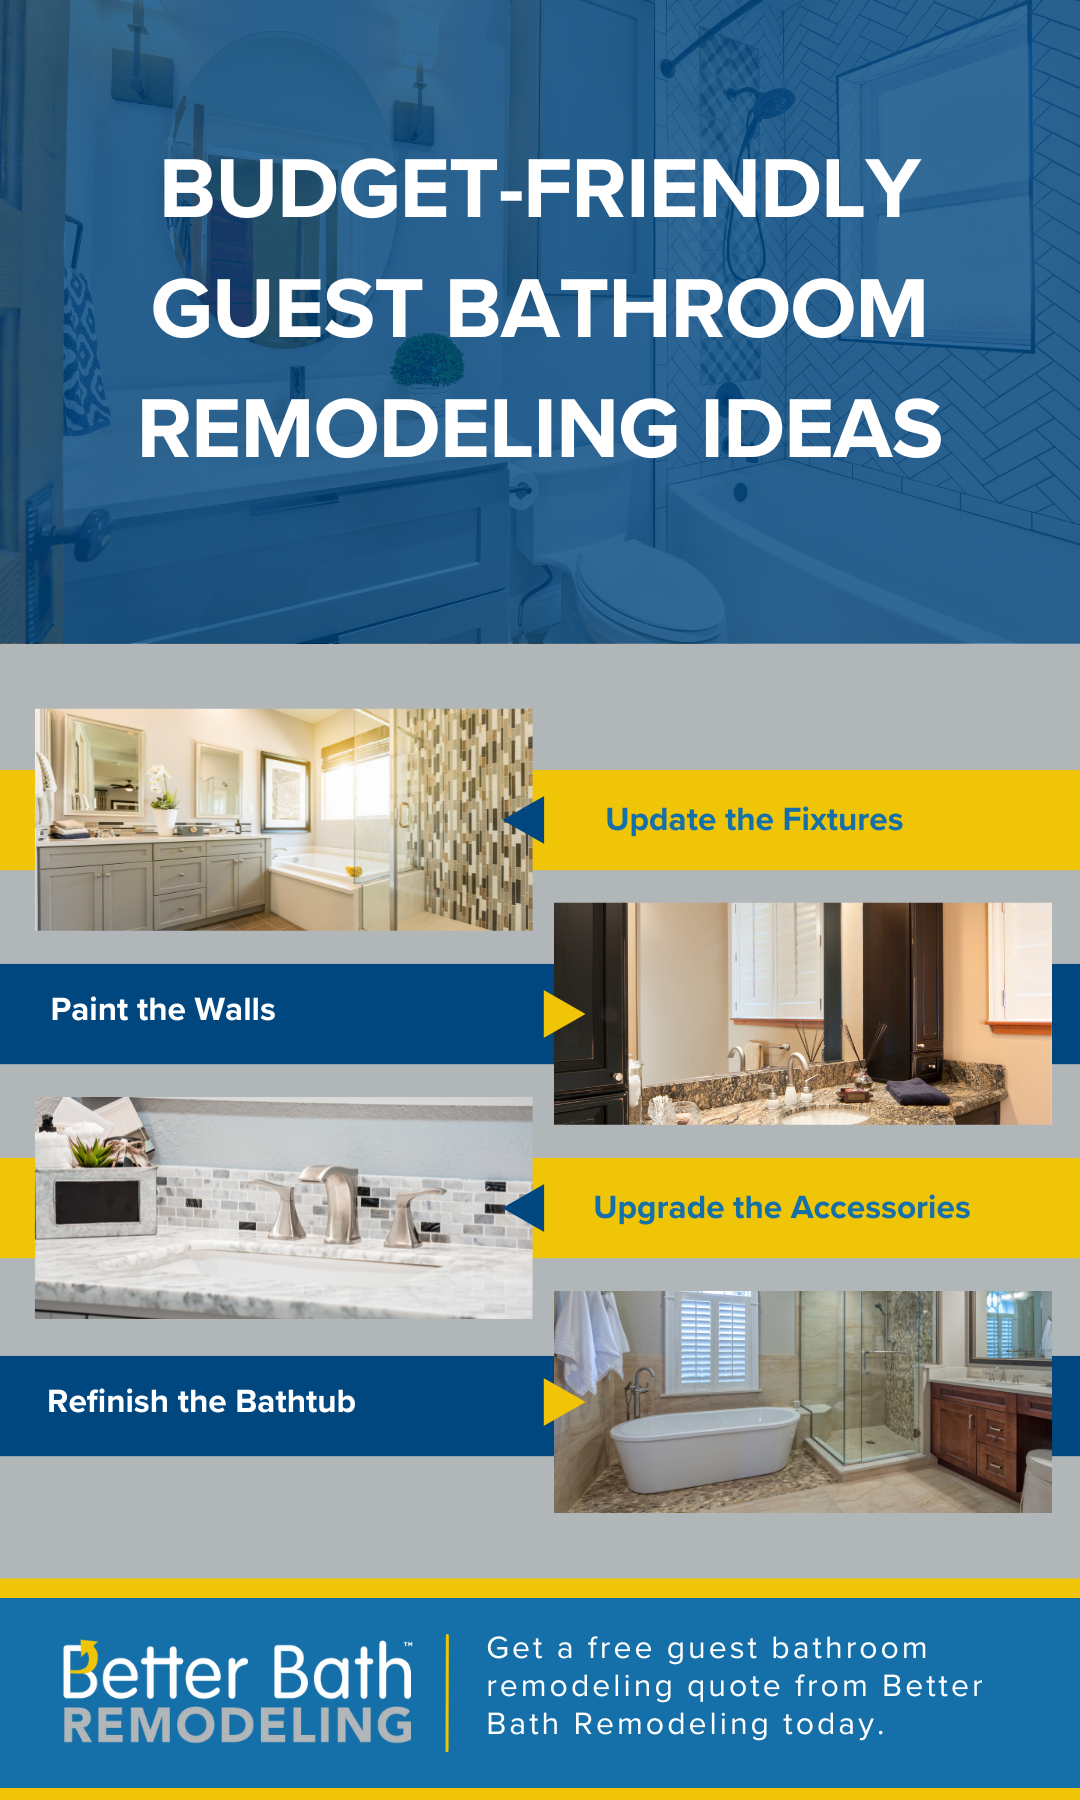 Guest Bathroom Remodeling Ideas infographic